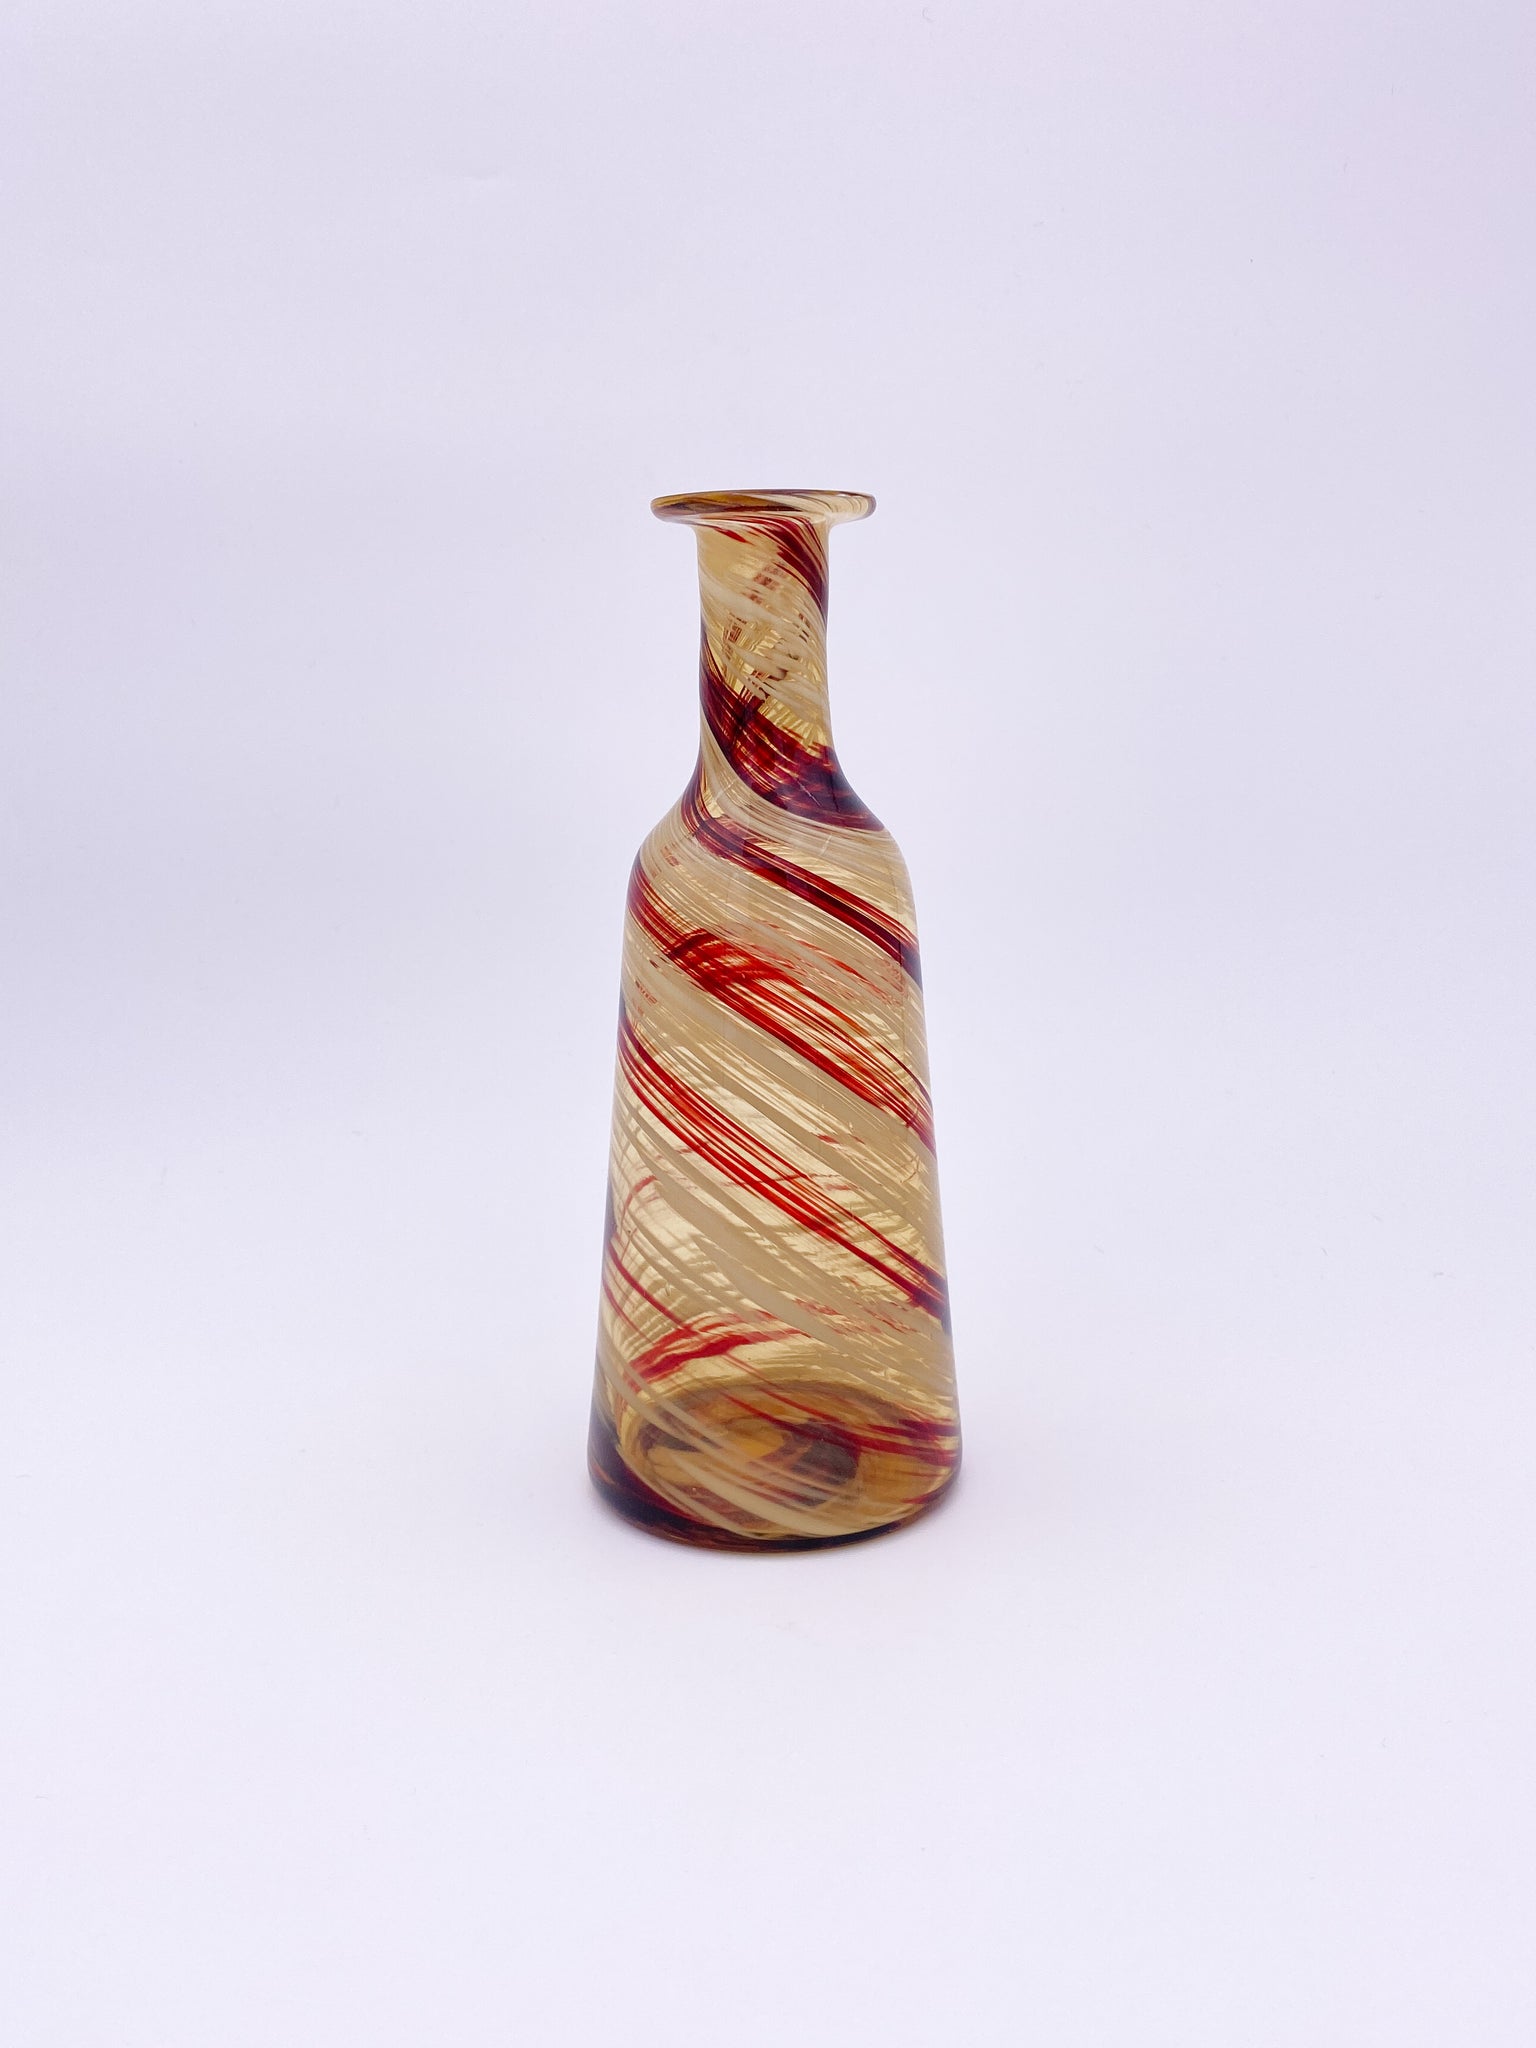 Brown and Beige Glass Bottle